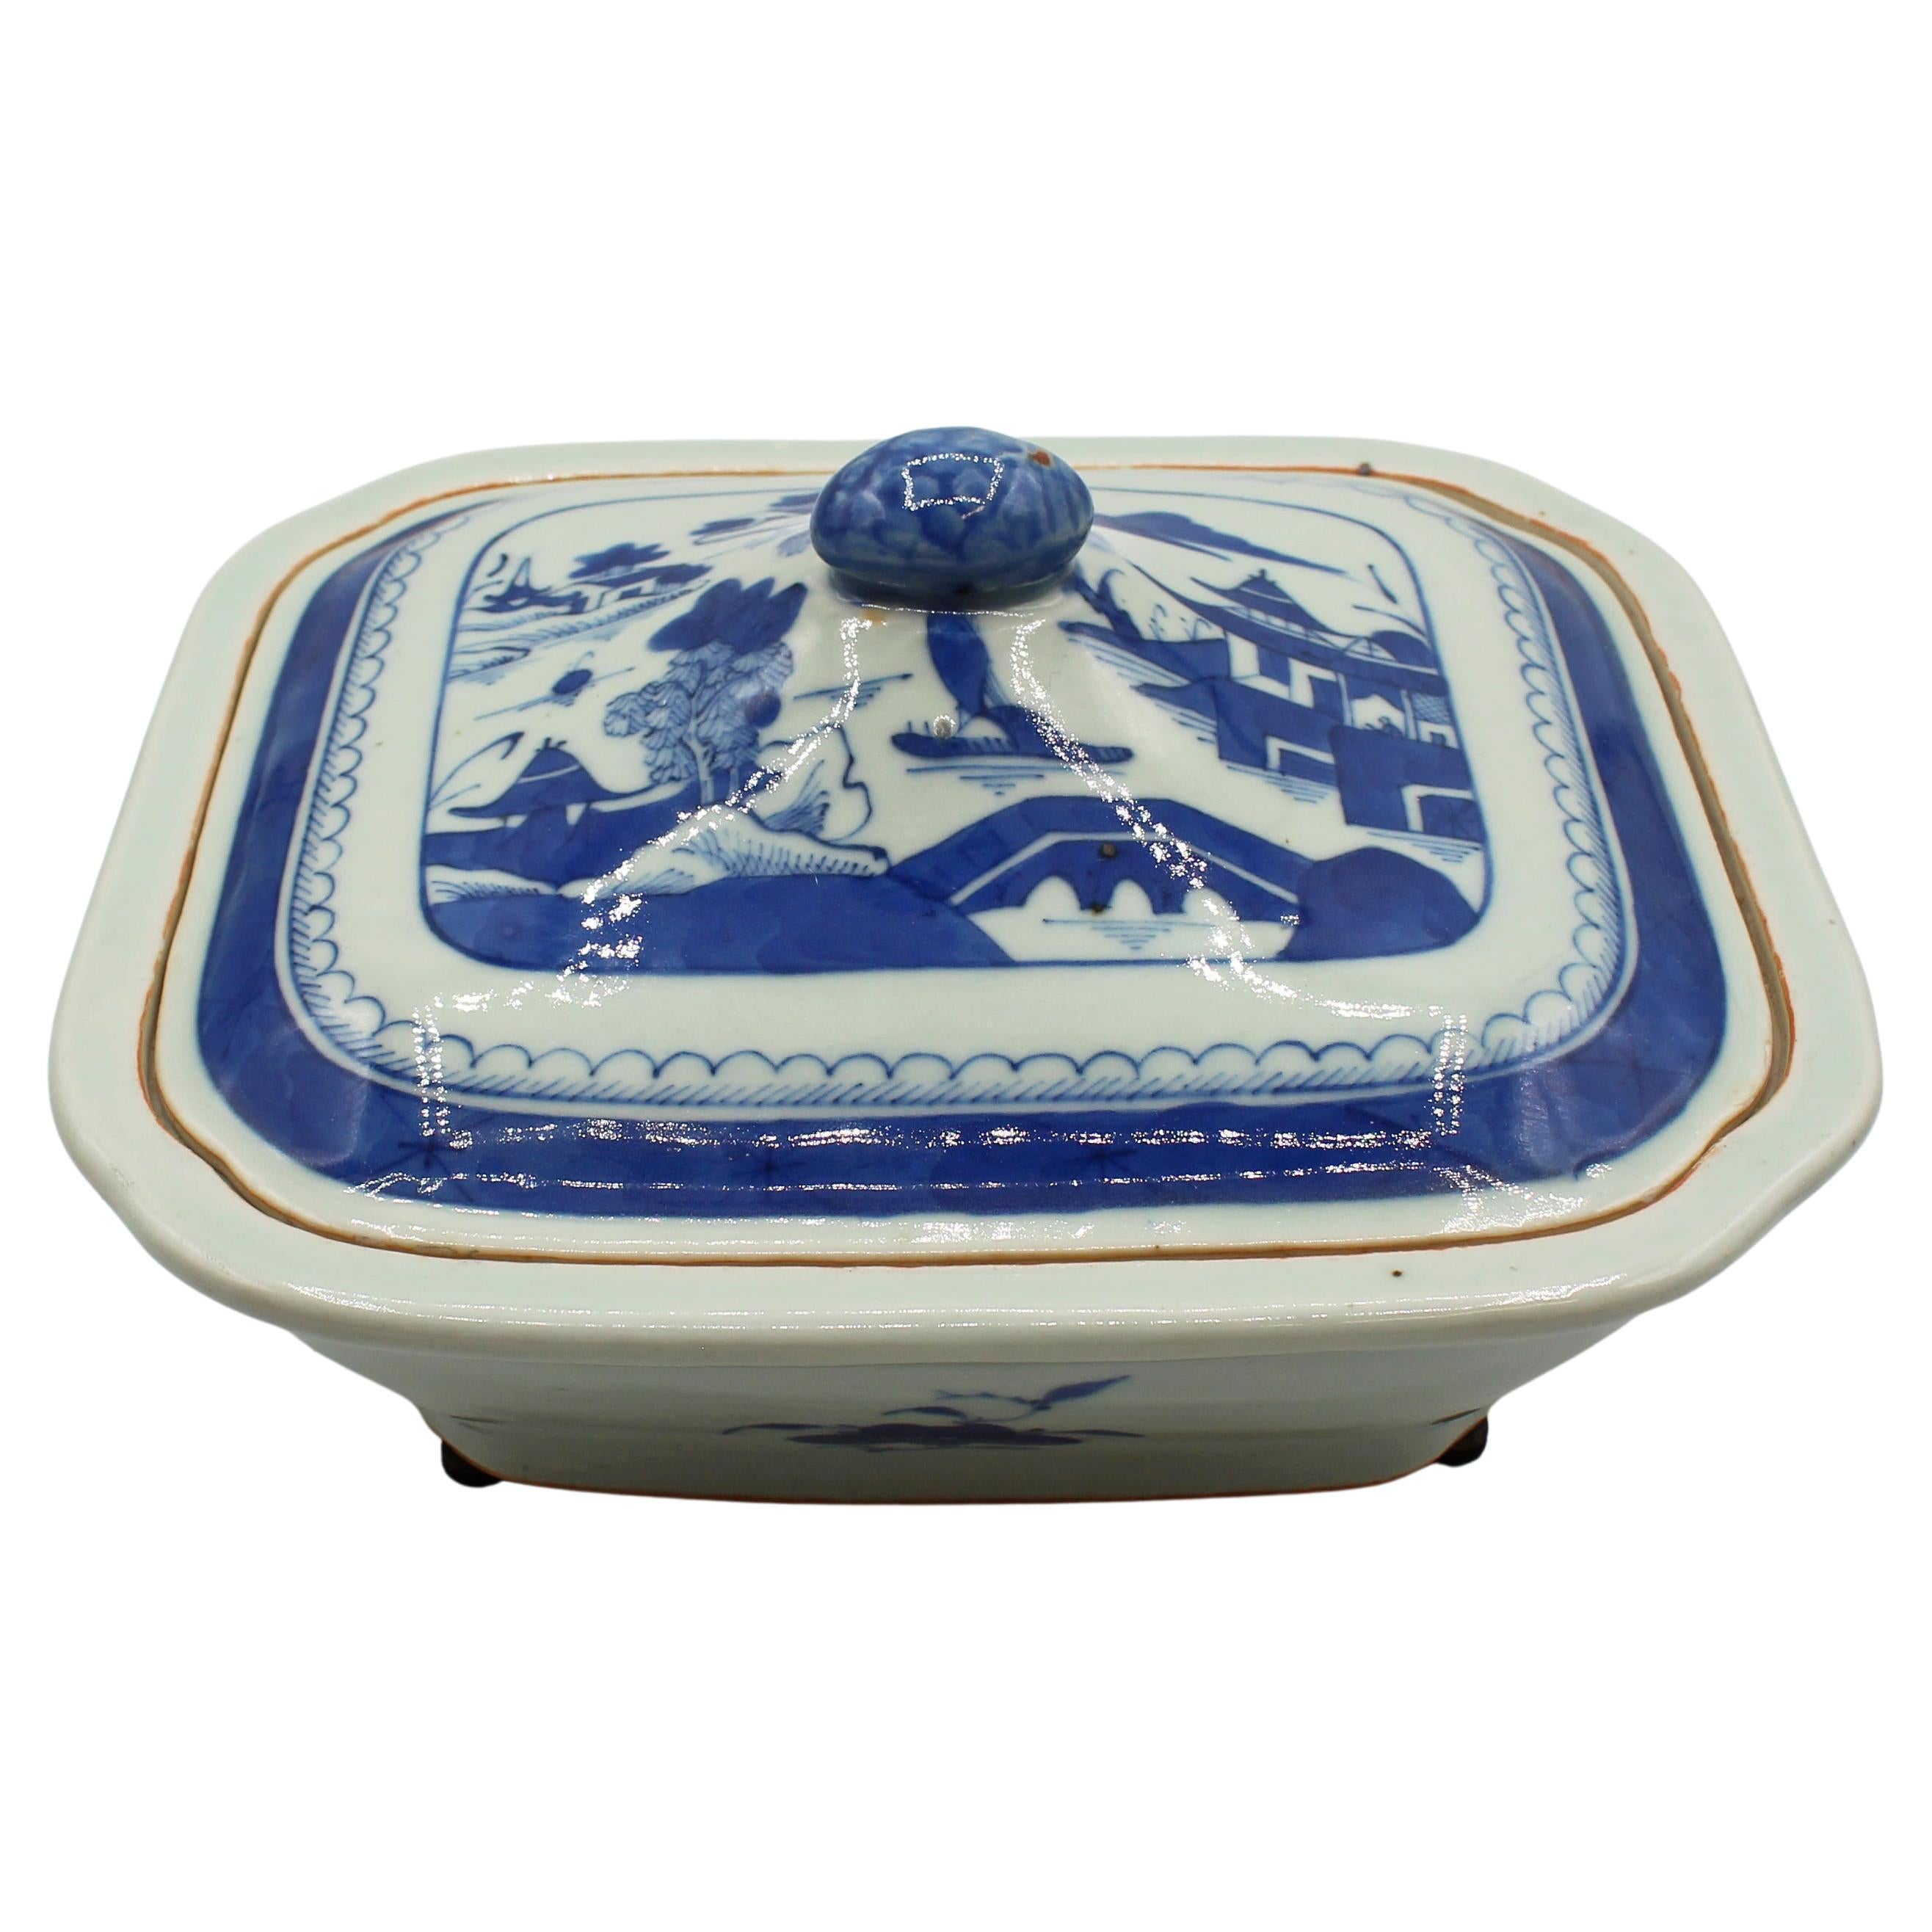 Circa 1860s Blue Canton Covered Vegetable Dish